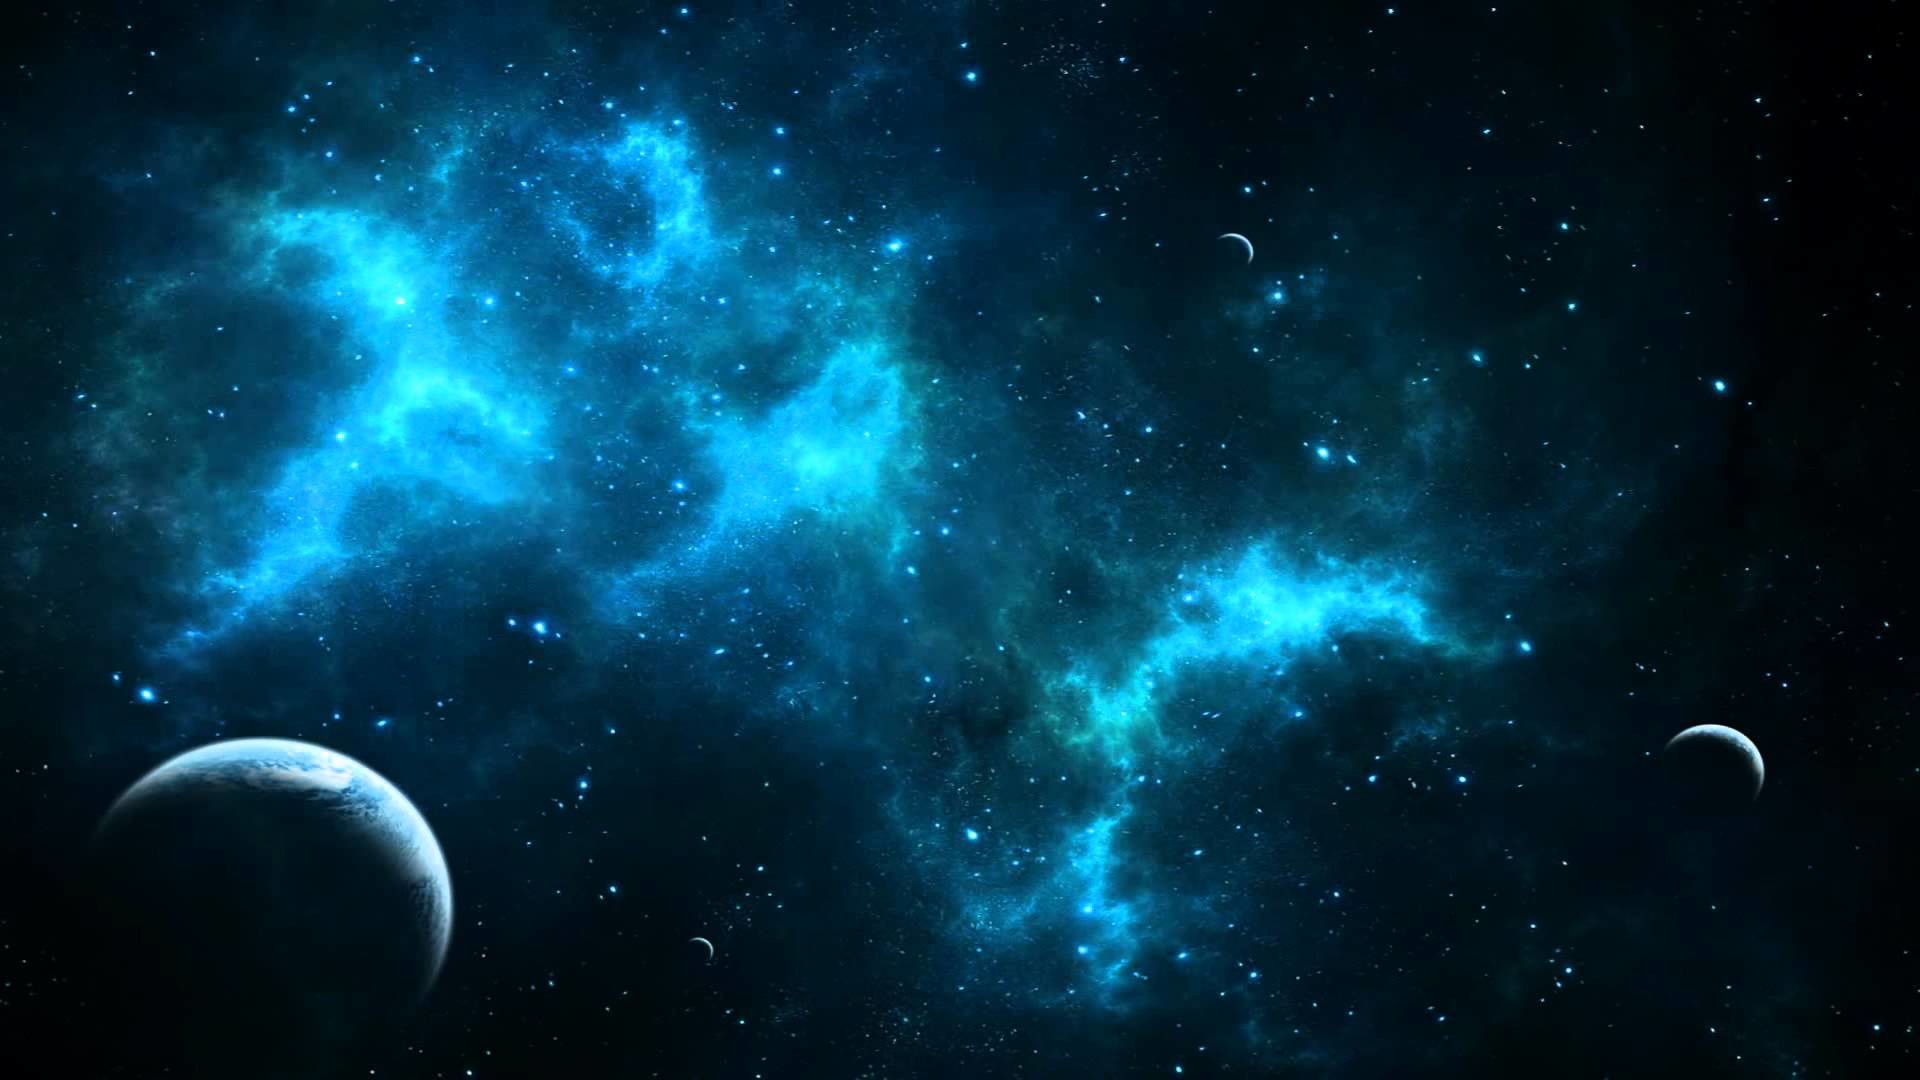 animated hd wallpaper 1920x1080,outer space,astronomical object,sky,atmosphere,universe